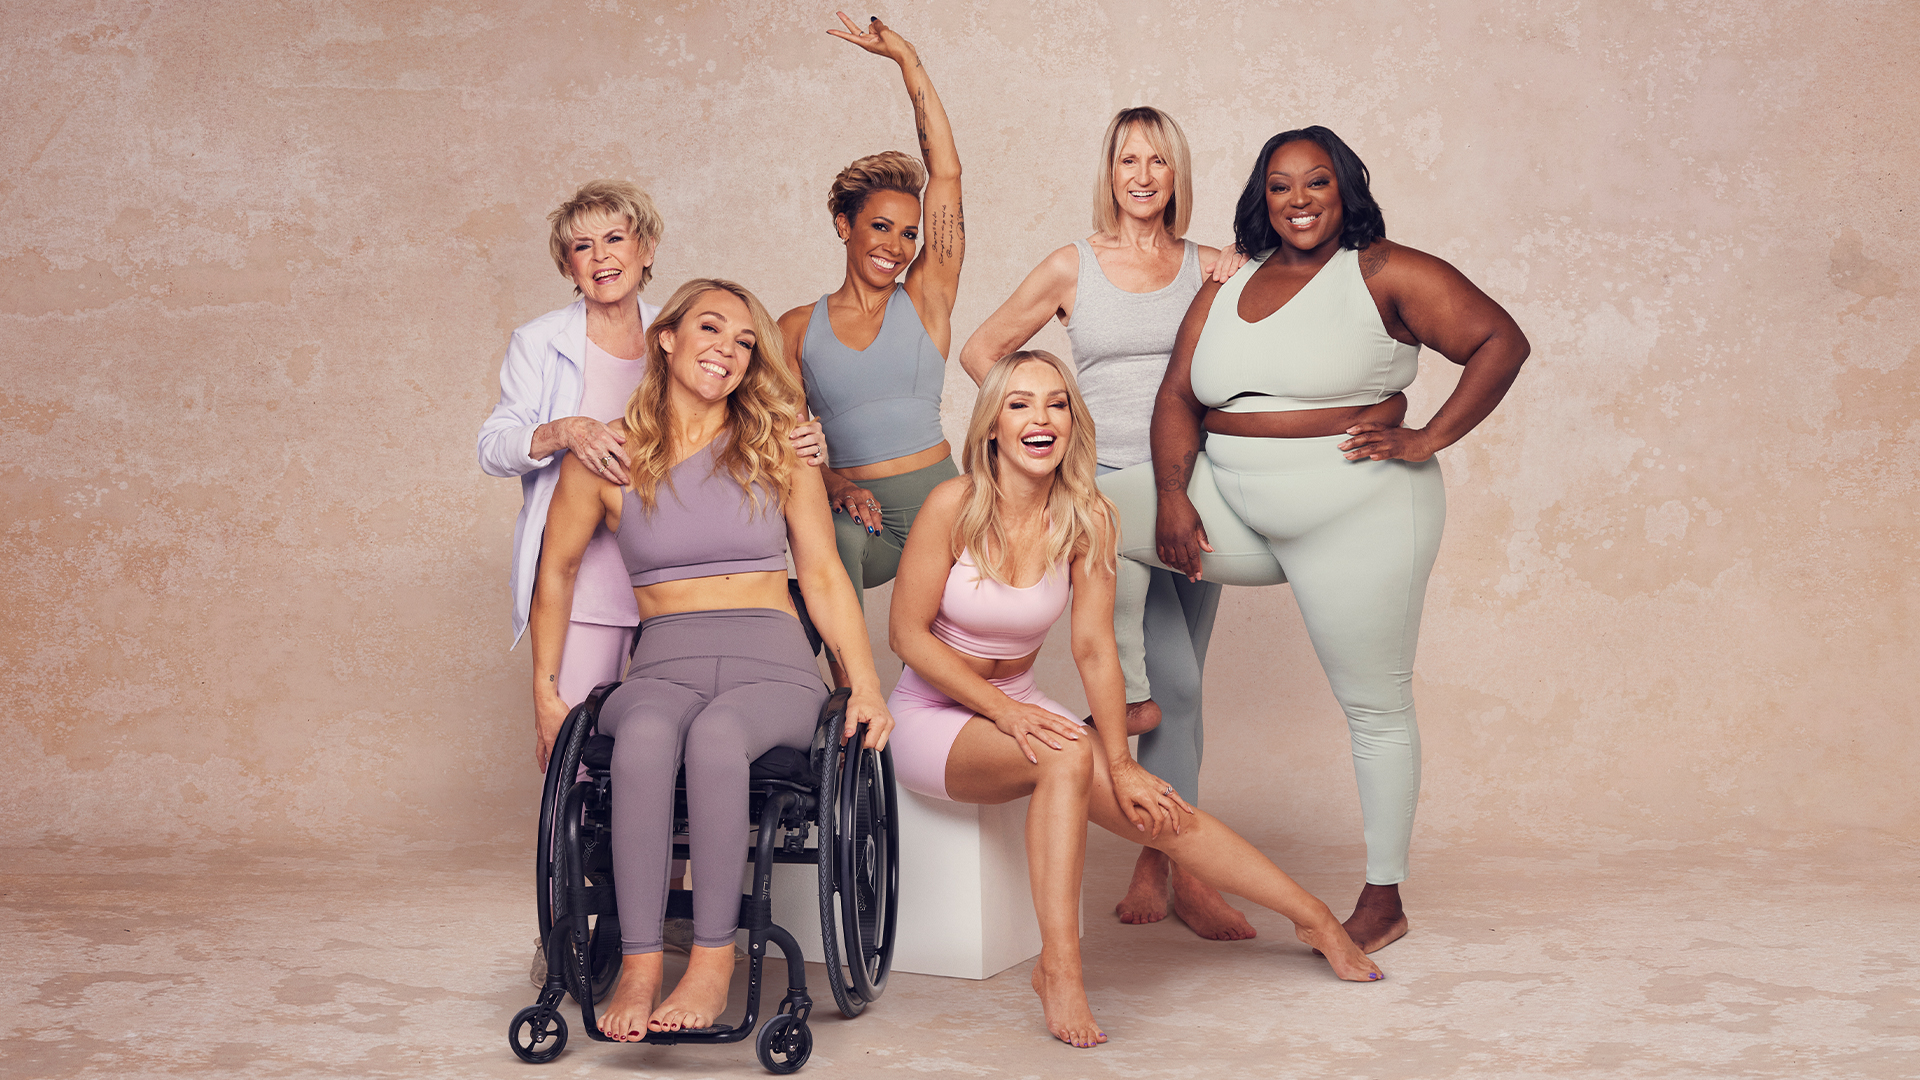 Loose Women's 'Body Stories: Celebrating Every Body' campaign to